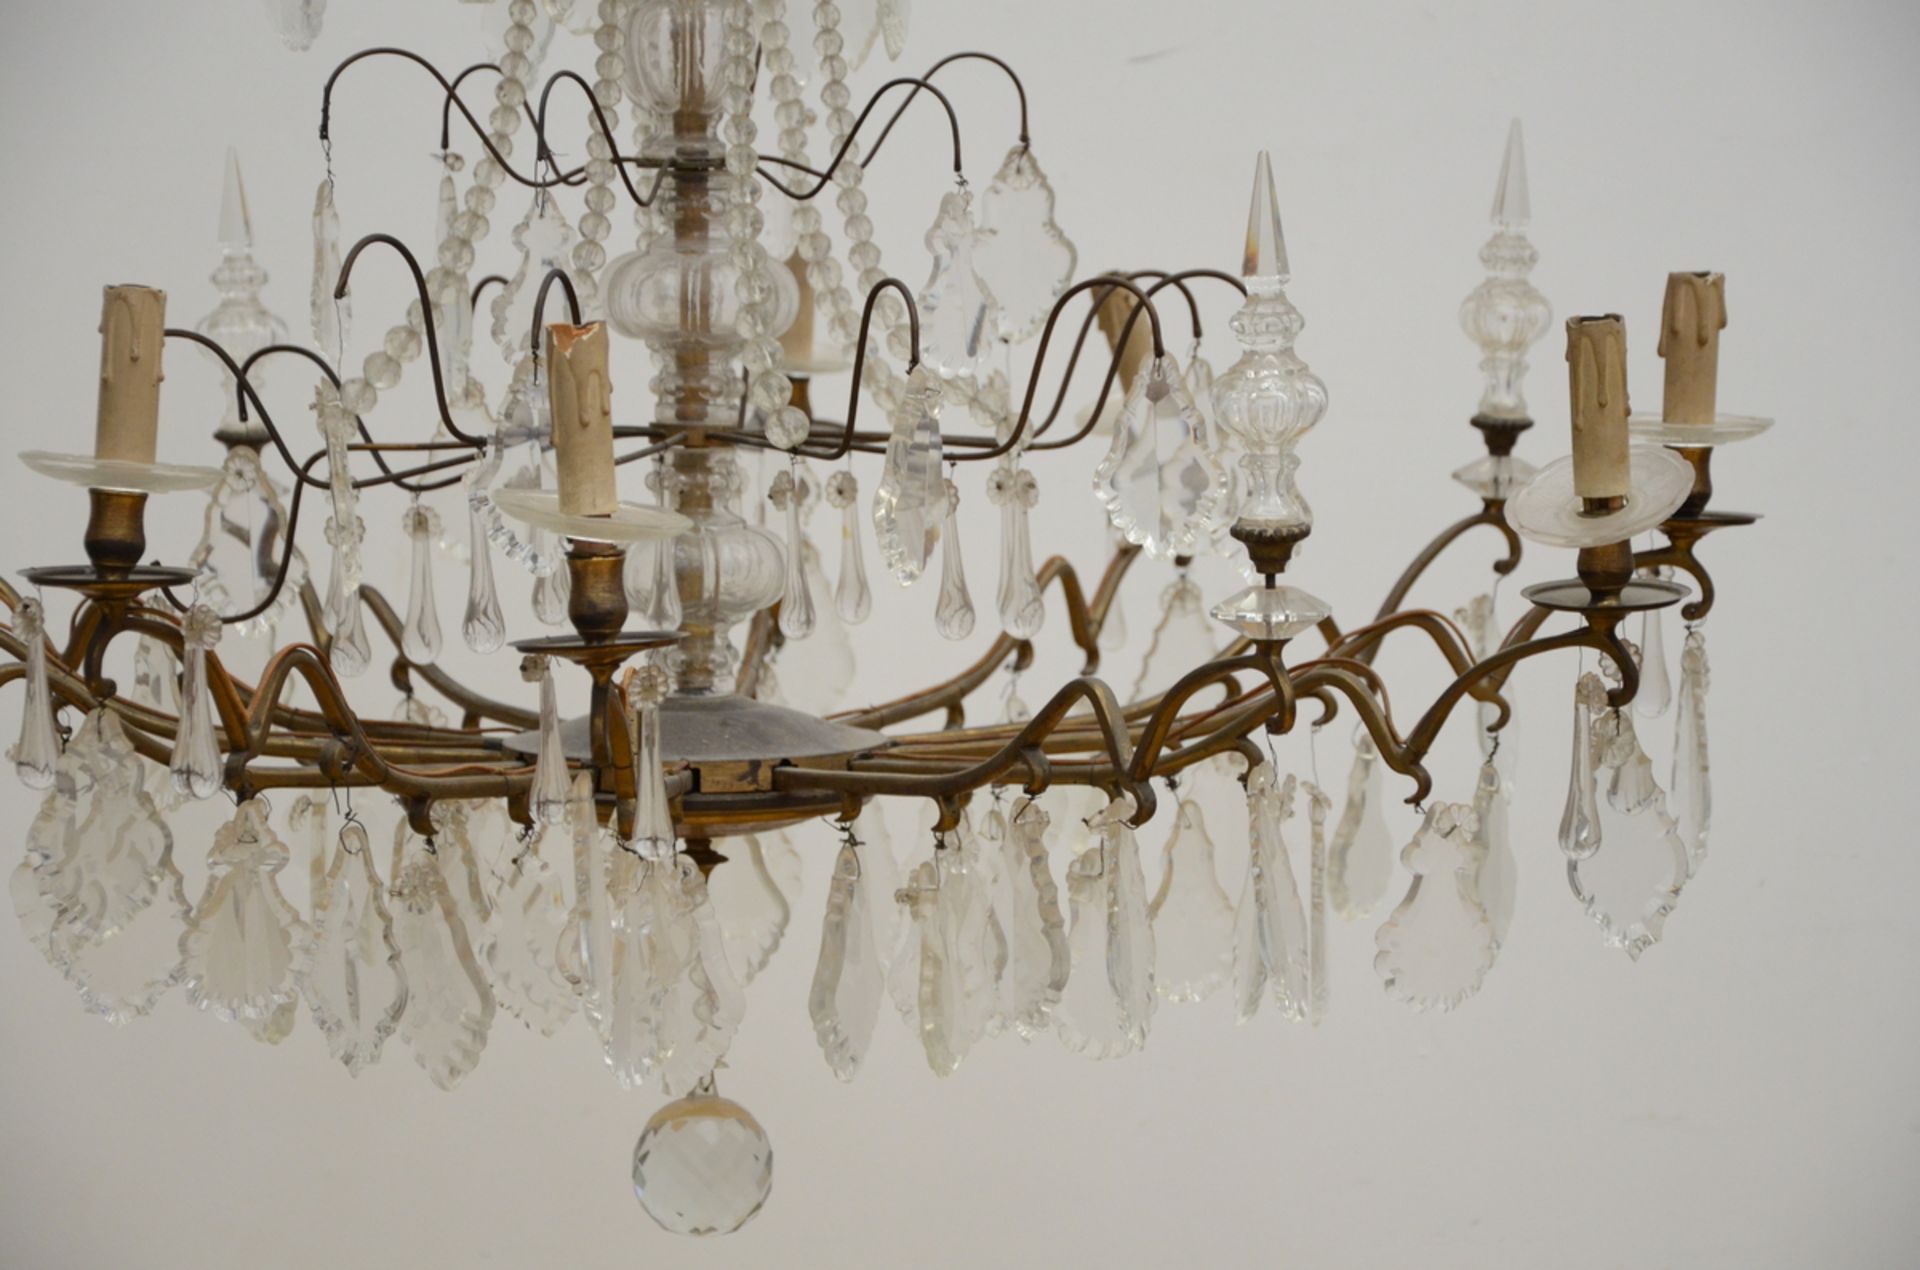 Large chandelier with crystal plaques (H122xdia106) - Image 2 of 3